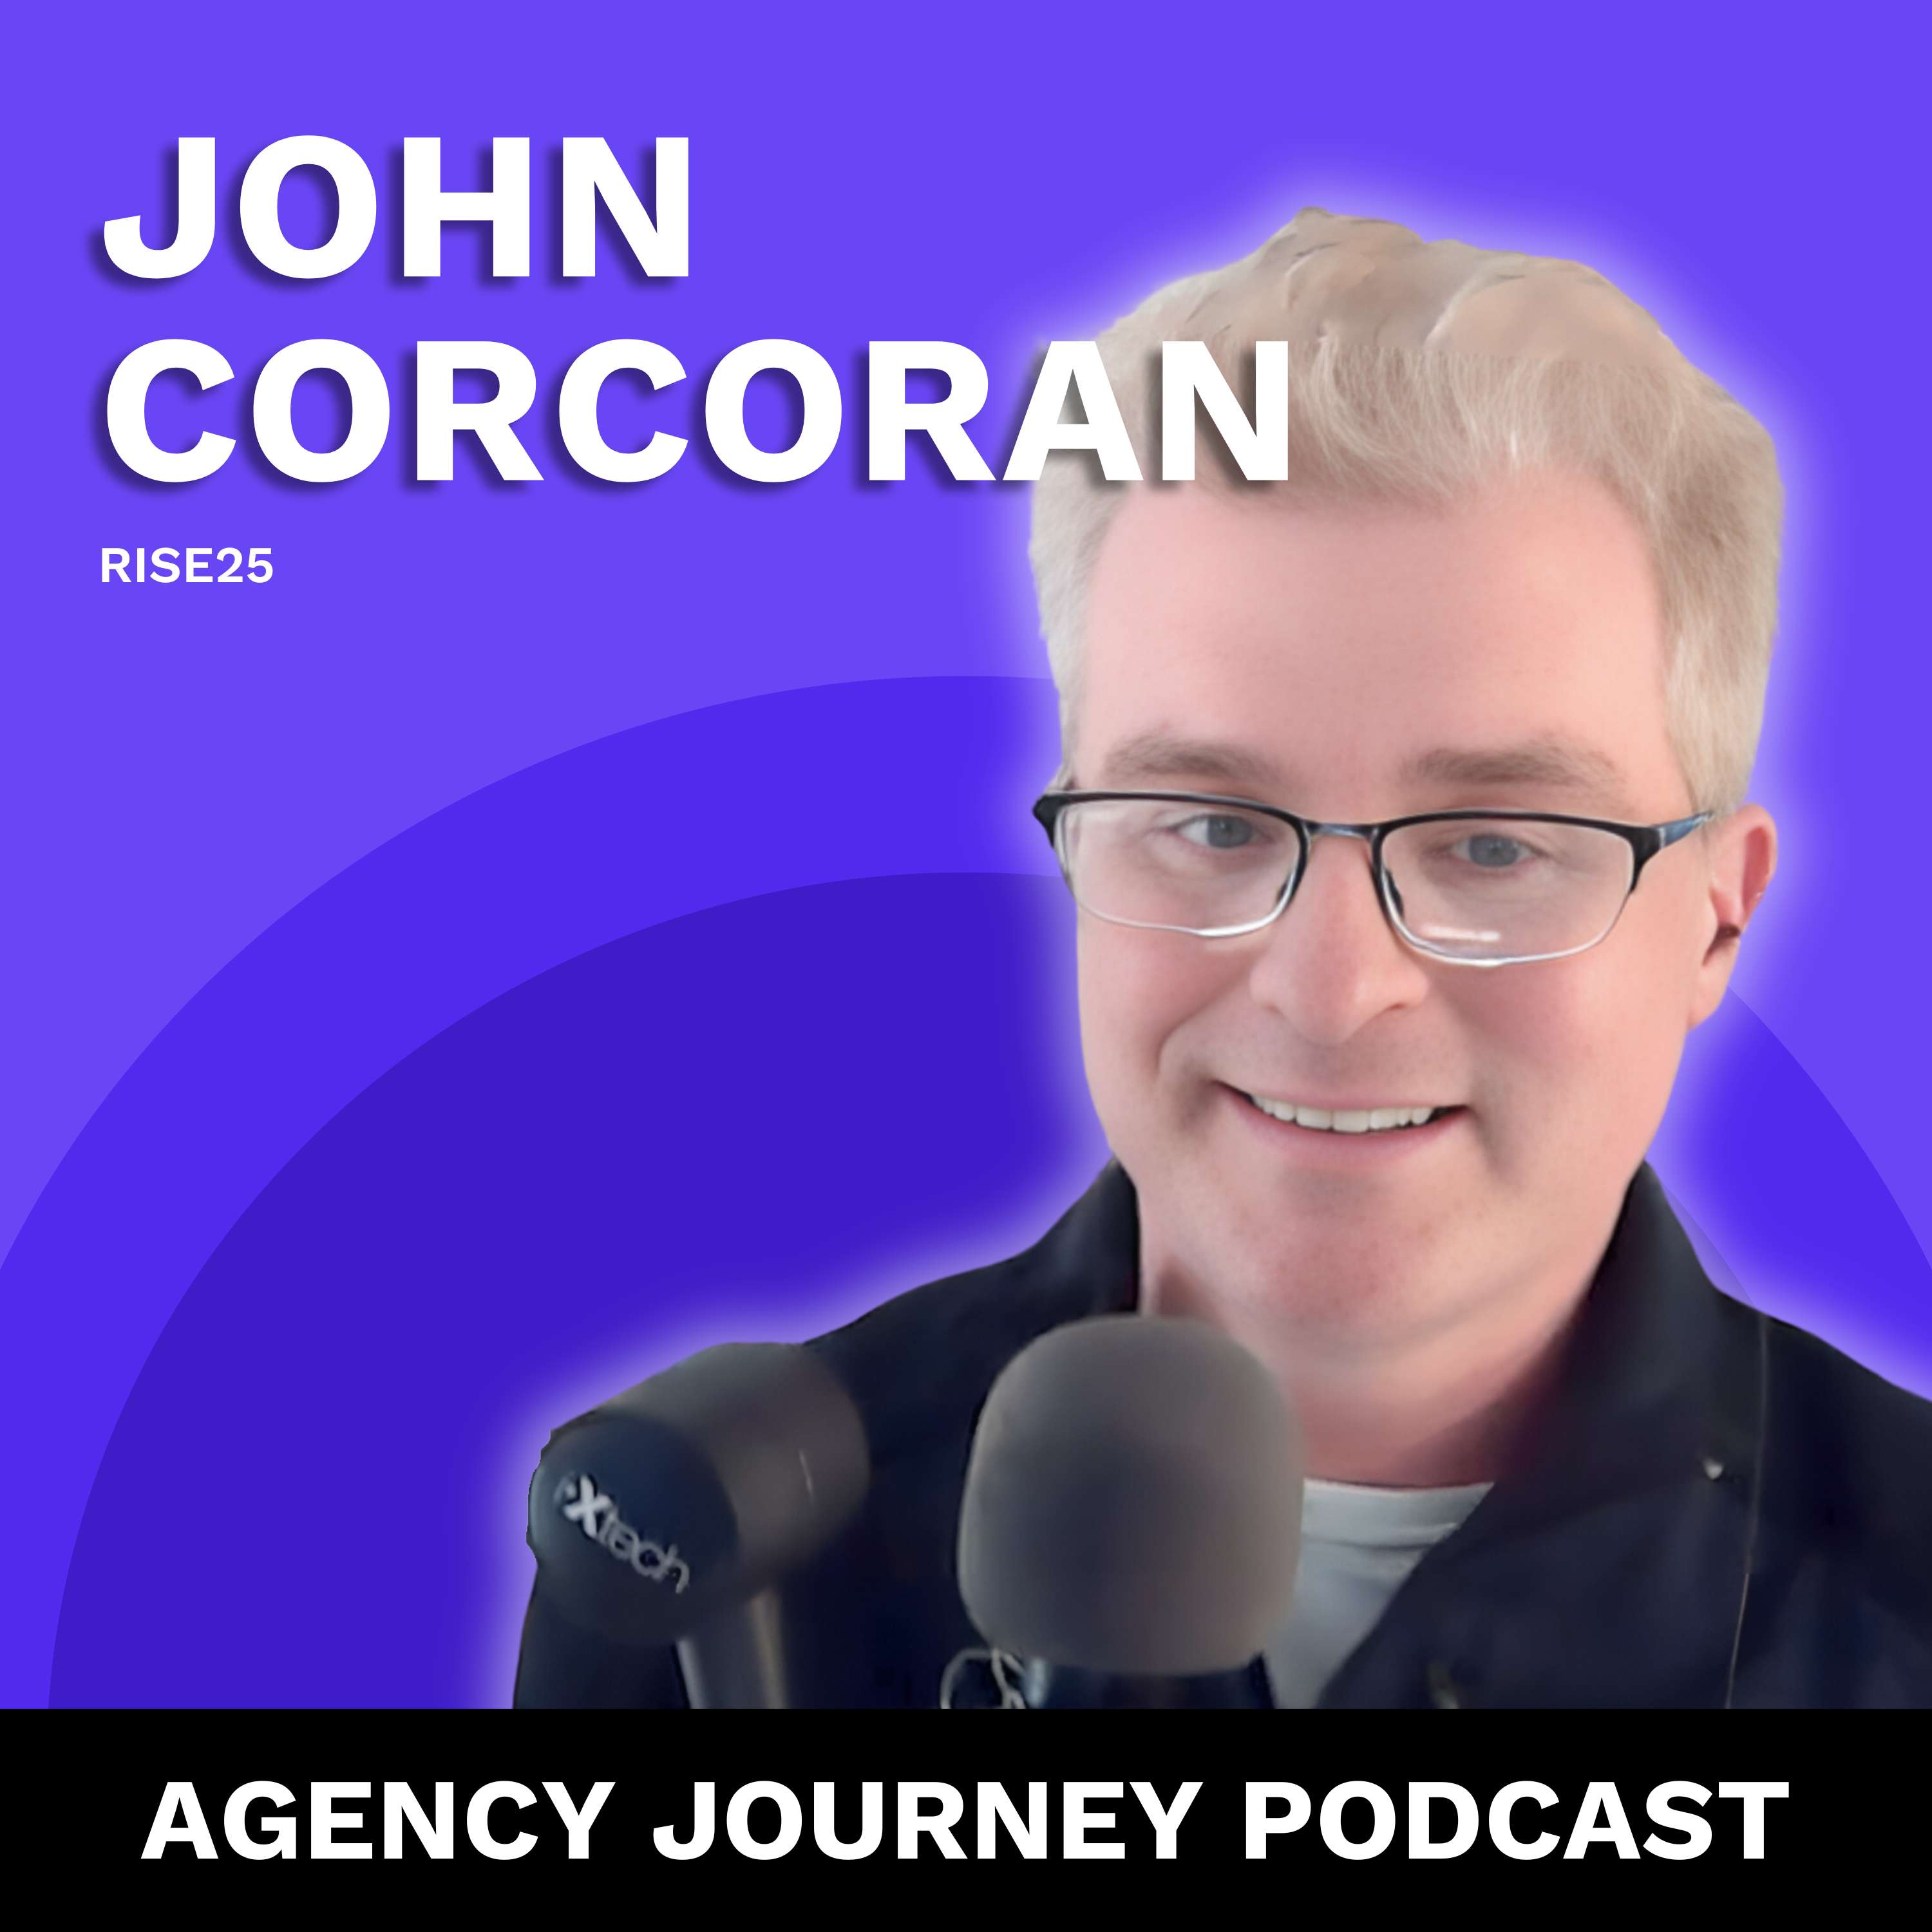 From White House Writer to Agency Founder: John Corcoran’s Playbook for Podcasting and Growth